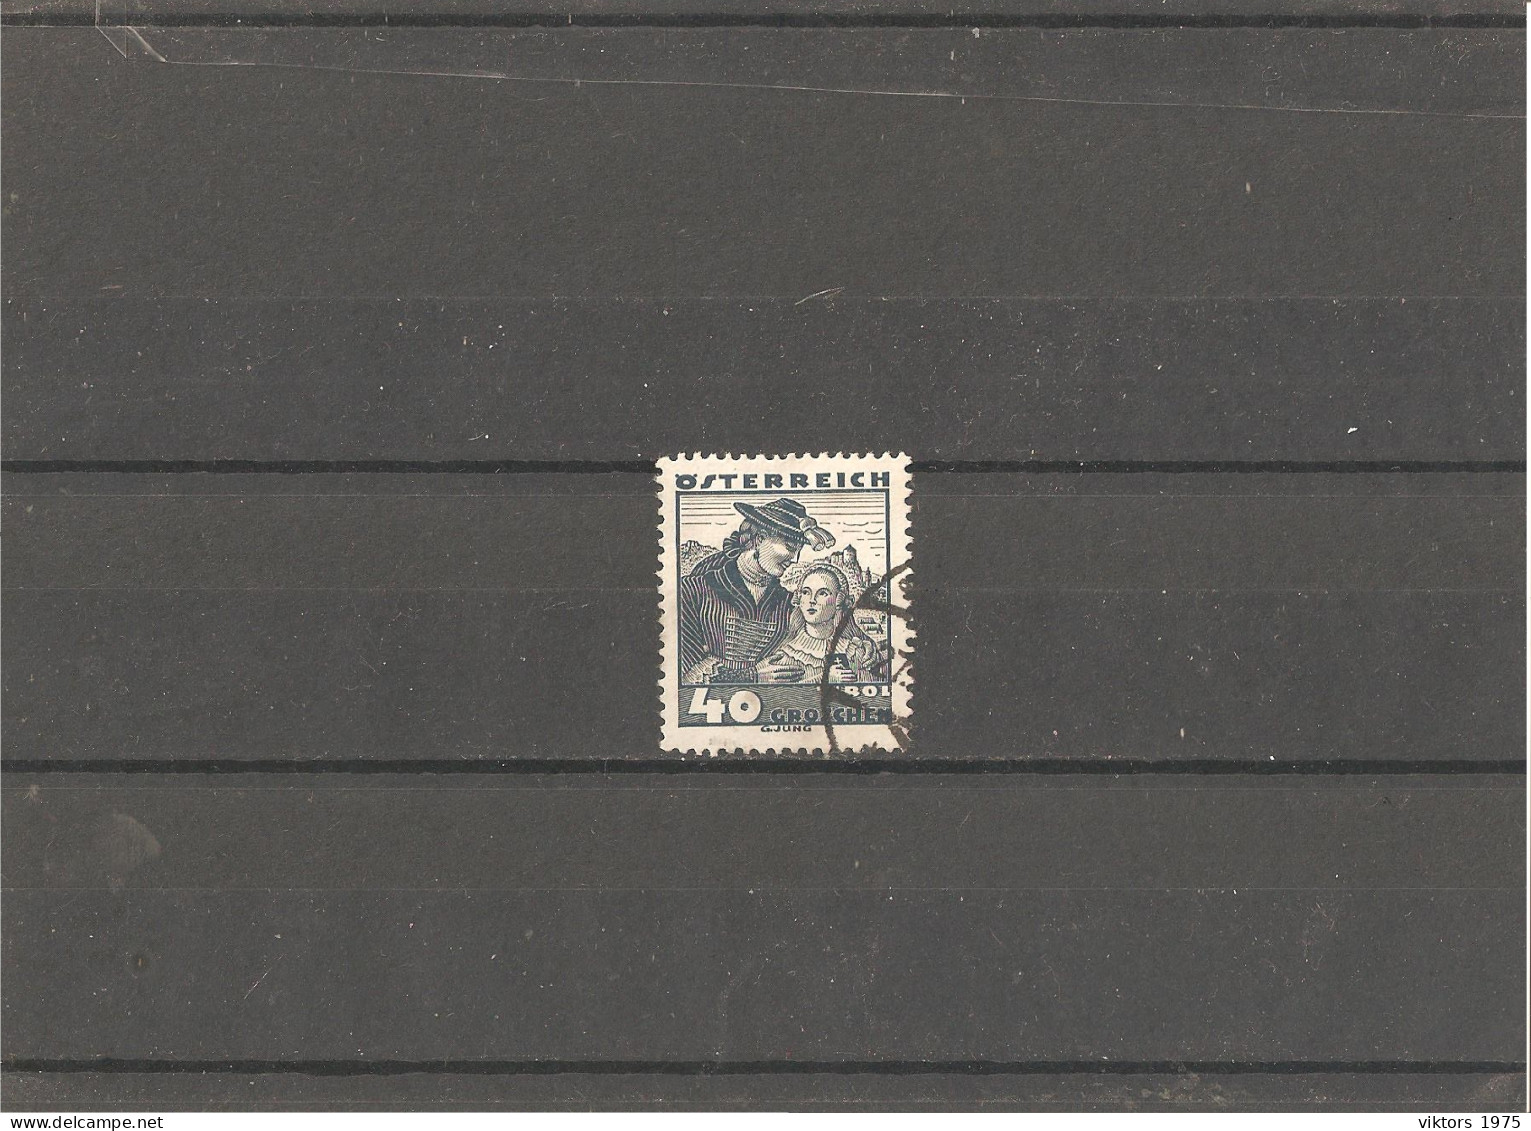 Used Stamp Nr.579 In MICHEL Catalog - Used Stamps